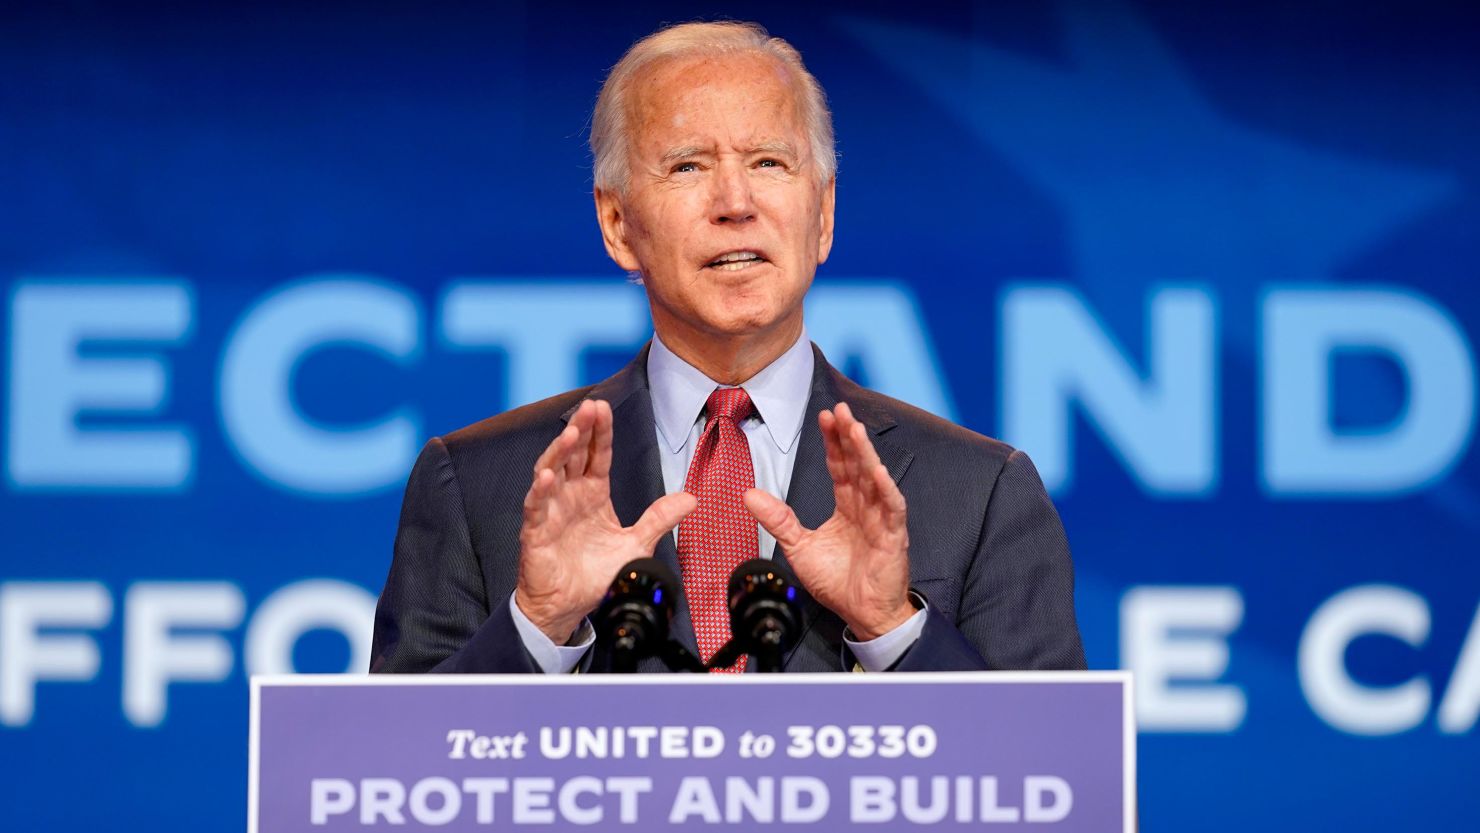 Biden If Elected Will Form Task Force To Reunite 545 Separated